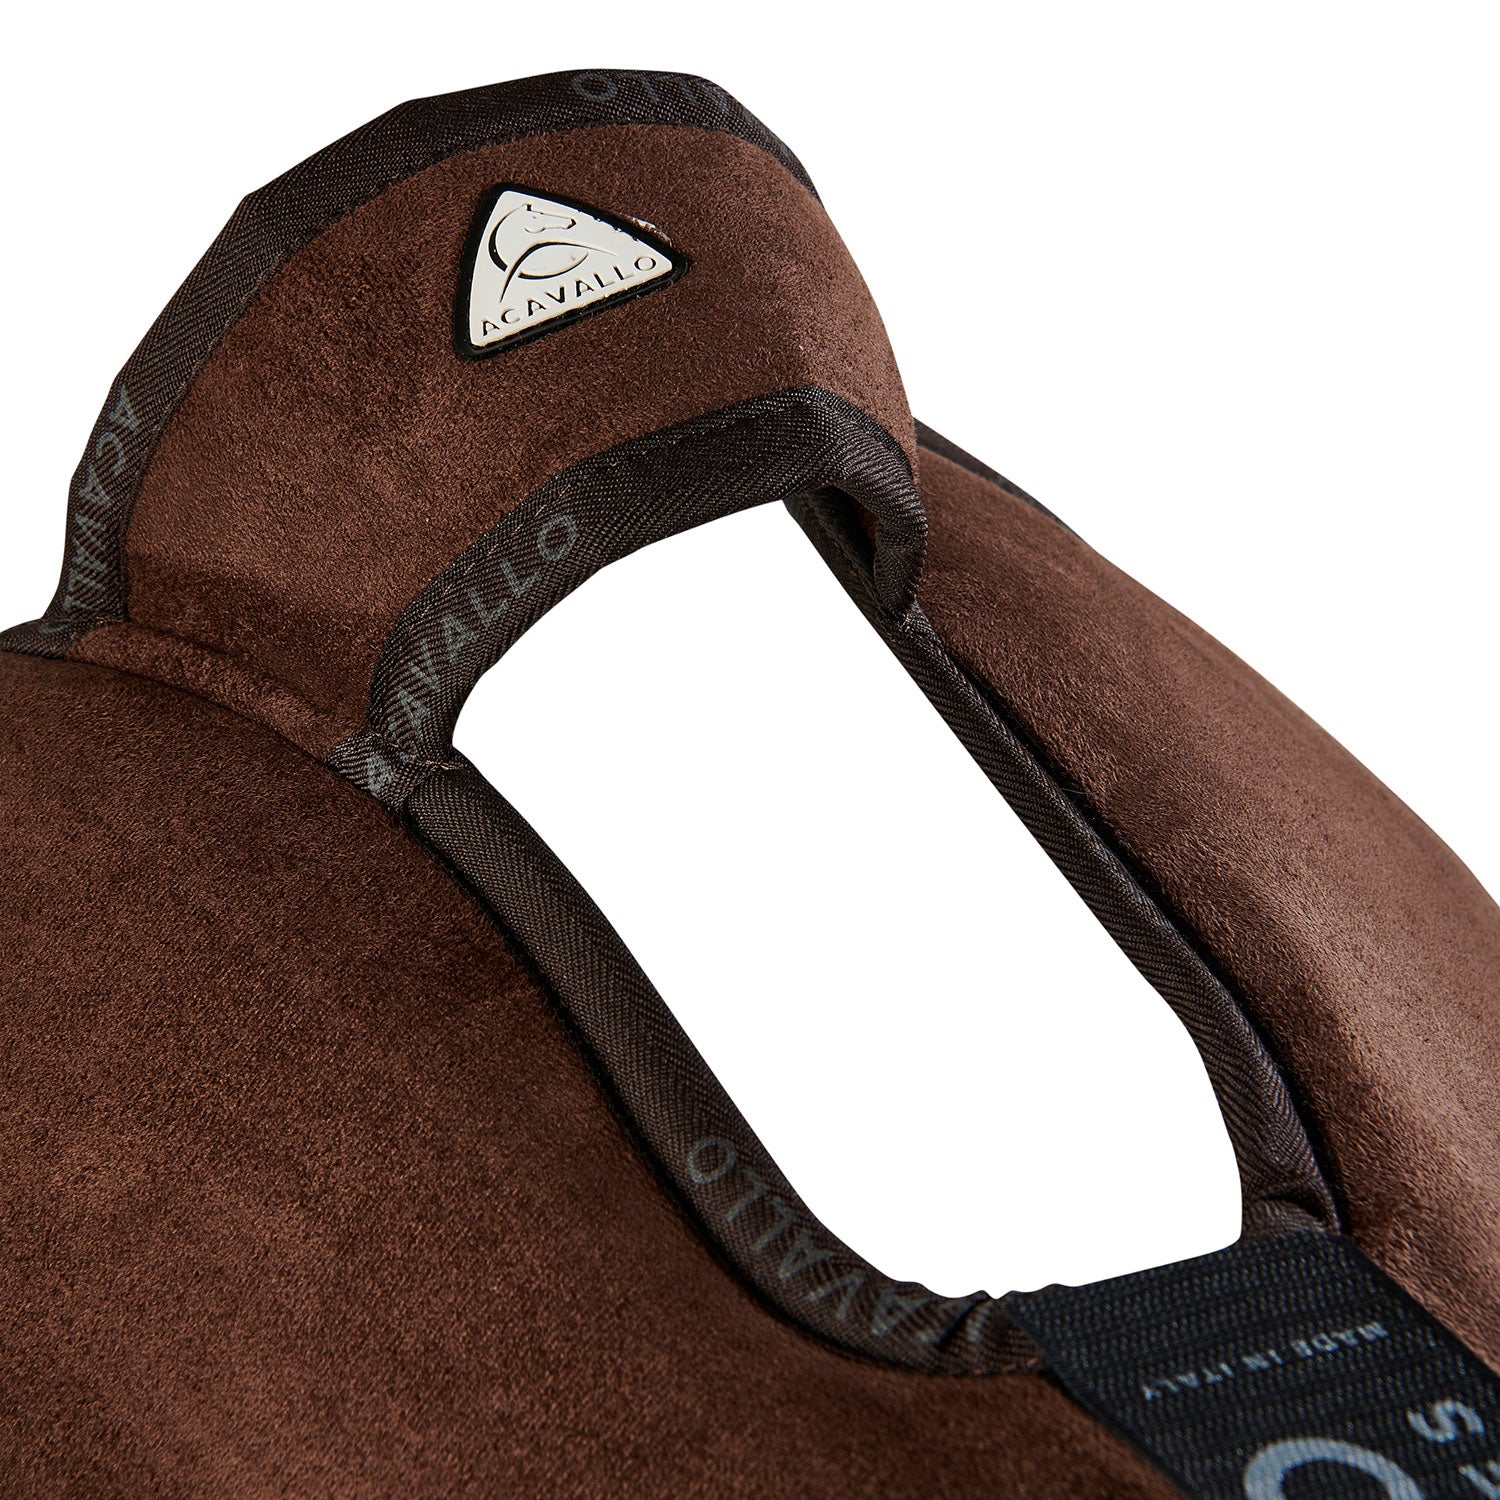 Pad WITHERS FREE POCKET CONFIGURATION PAD WITH PIUMA PAD - Reitstiefel Kandel - Dein Reitshop